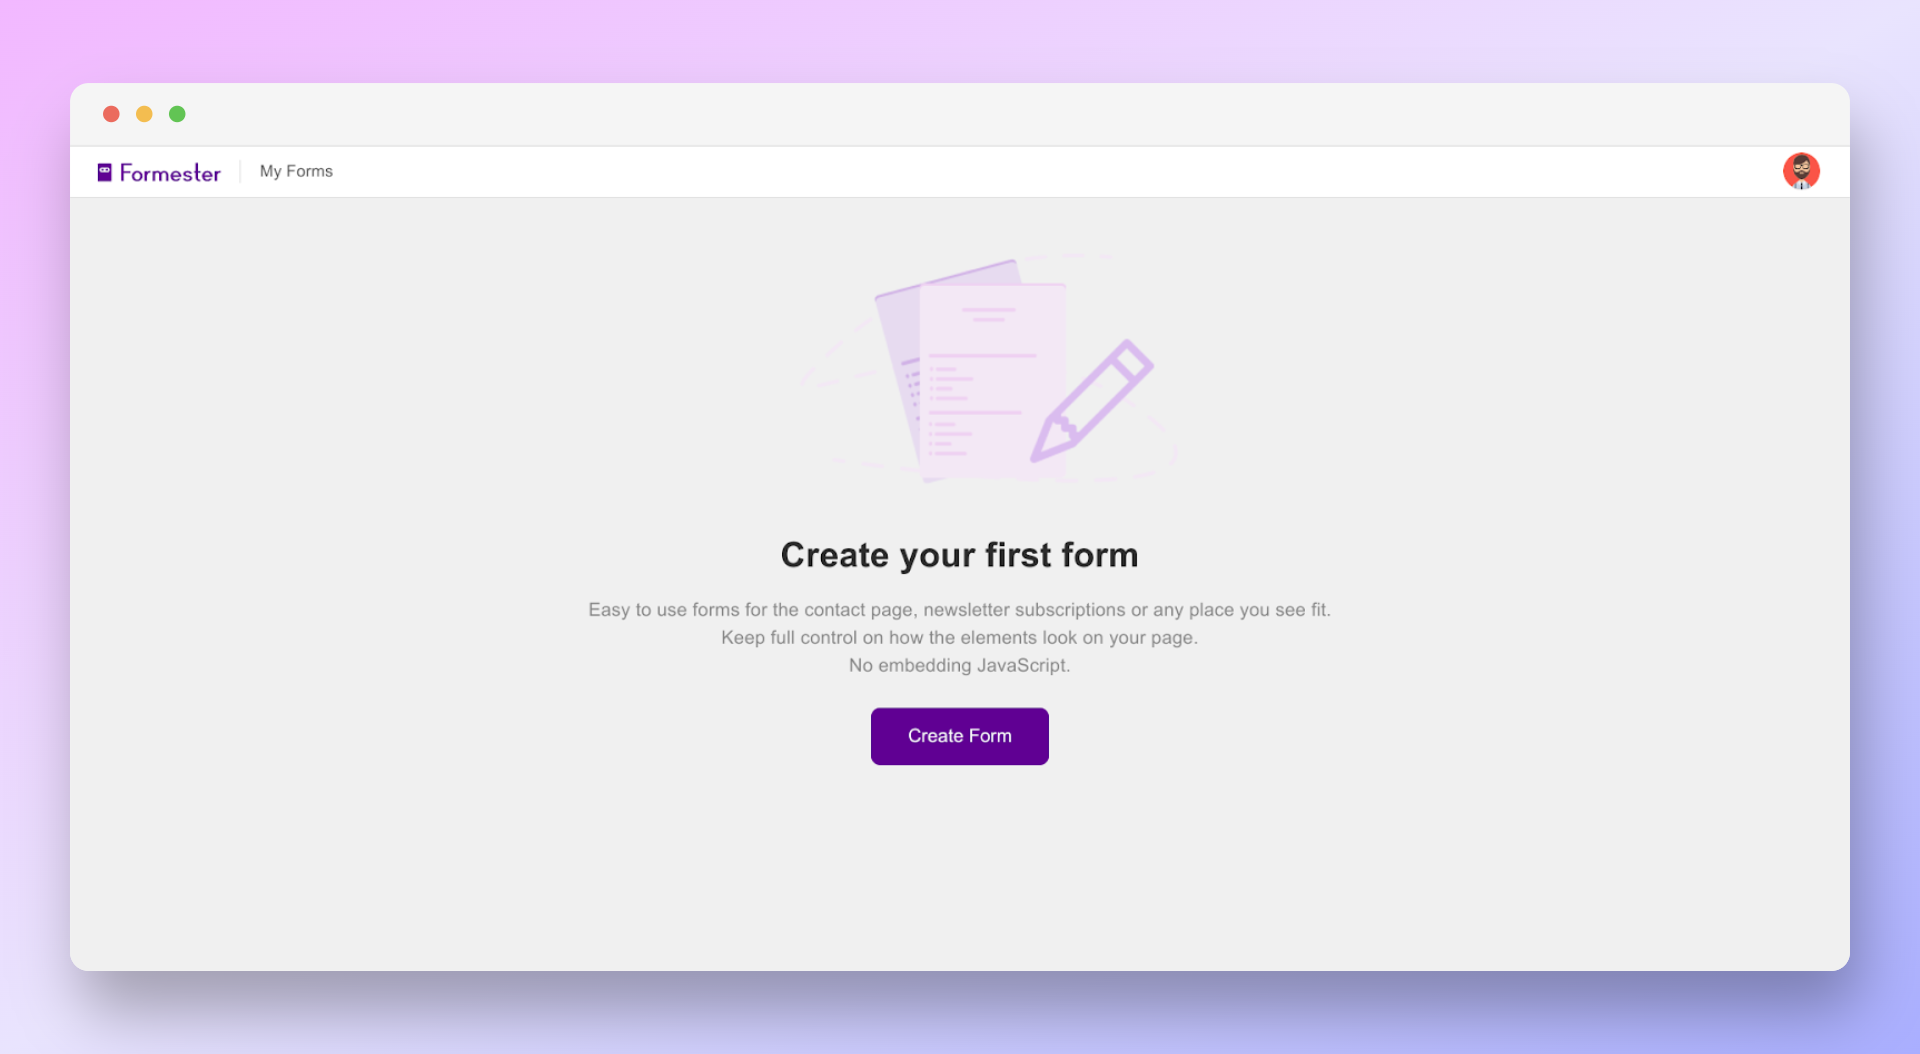 Forms page showing create your first form button